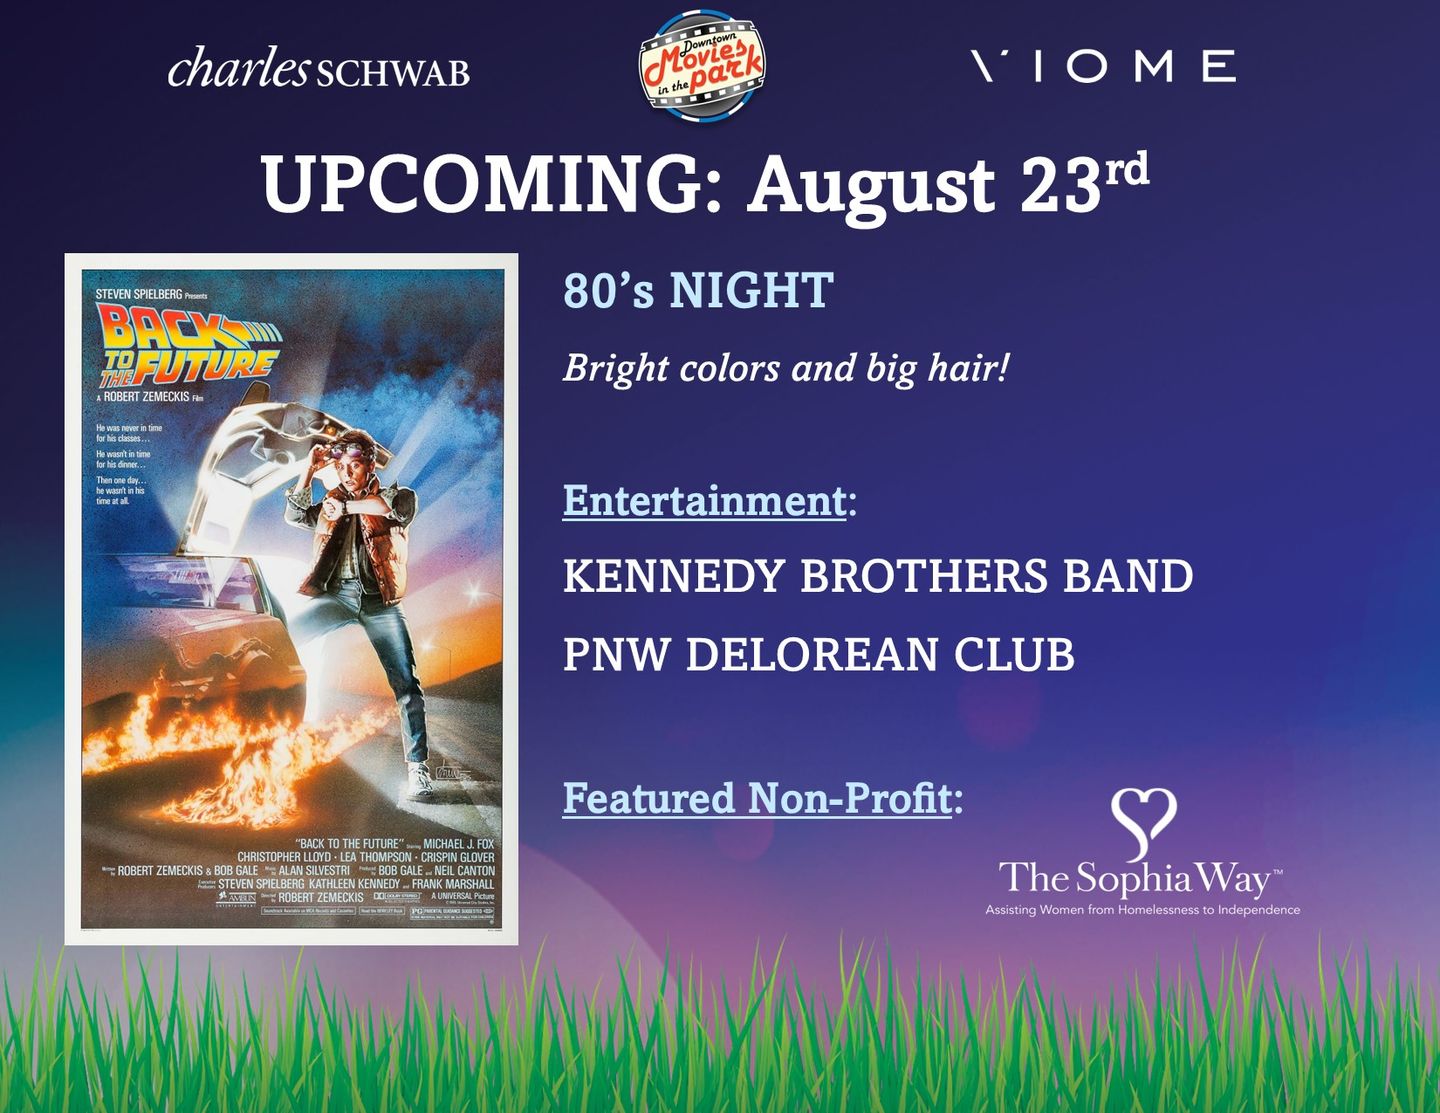 Image of Back to the Future movie poster. Text reads: upcoming: August 23rd. 80's night. Bright colors and big hair! Entertainment: Kennedy Brothers Band, PNW Delorean Club. Featured Non-Profit: The Sophia Way